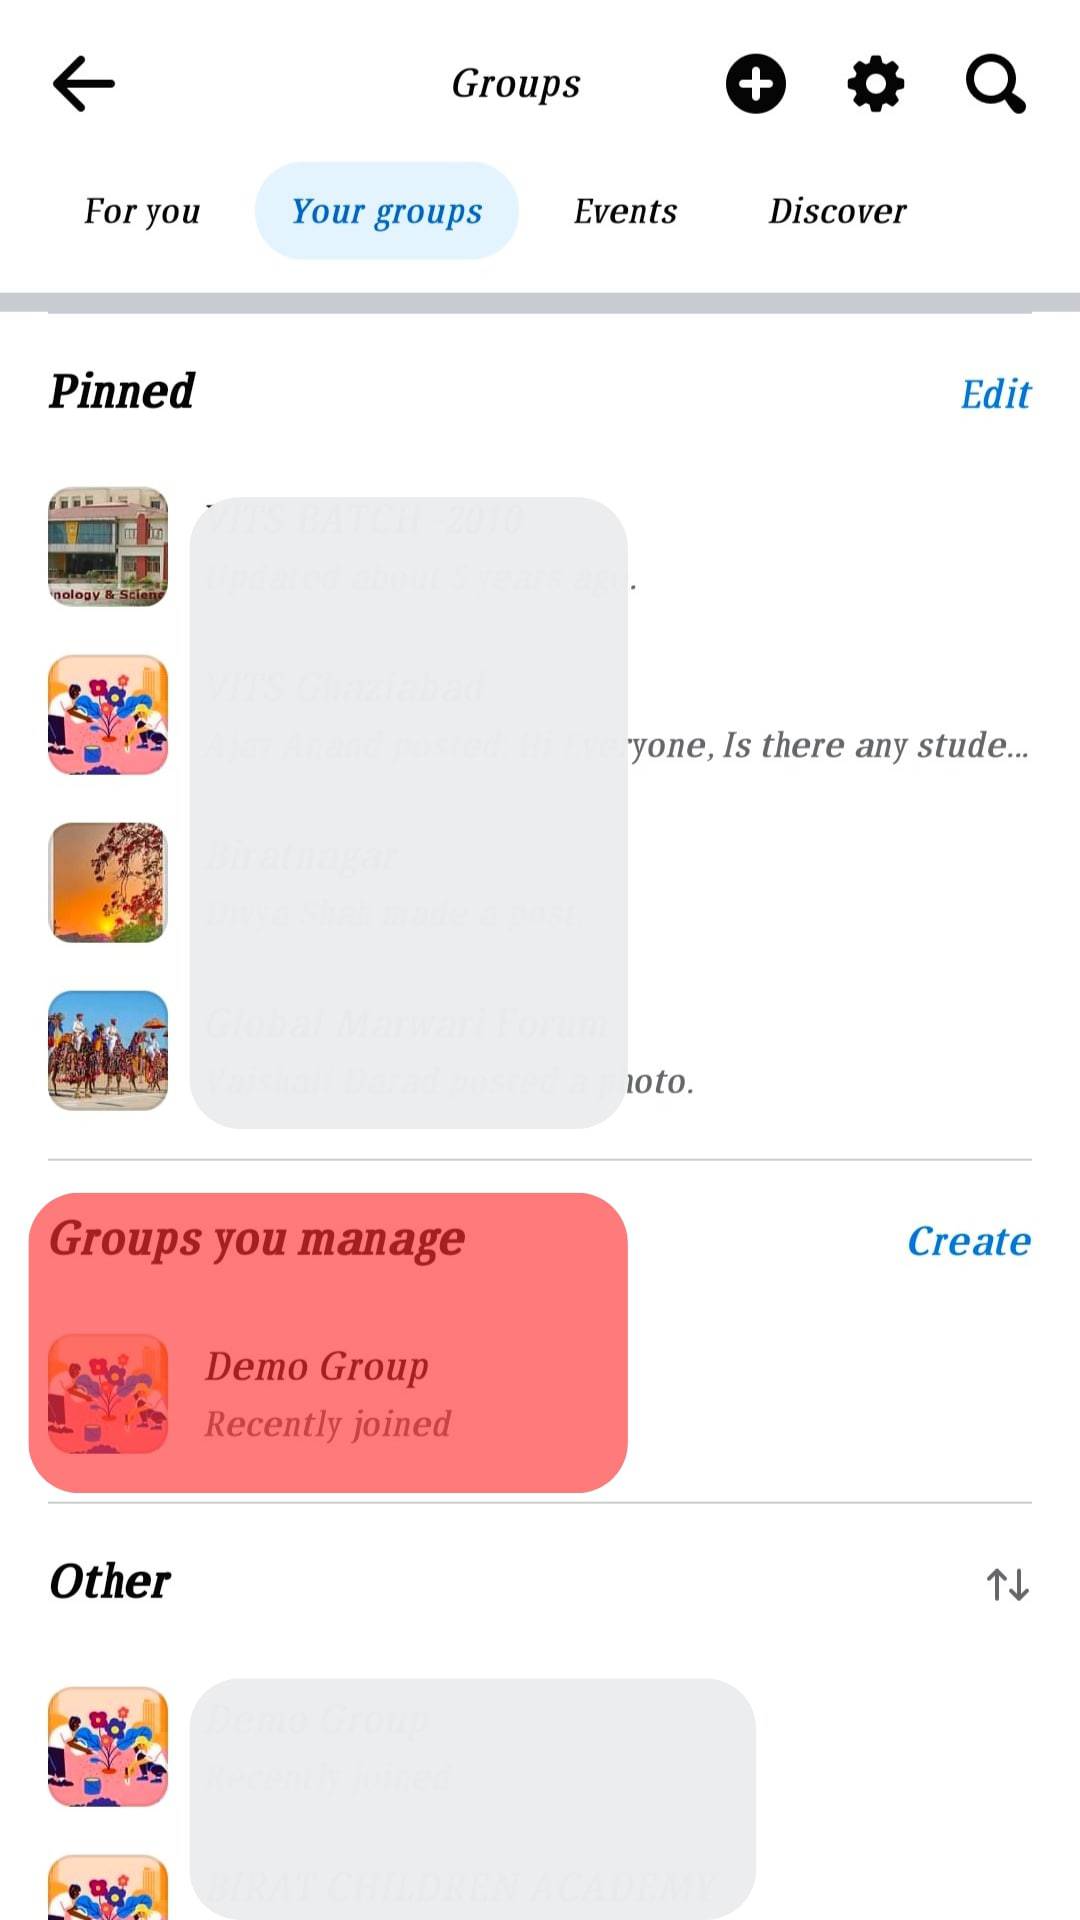 Select The Group You Manage